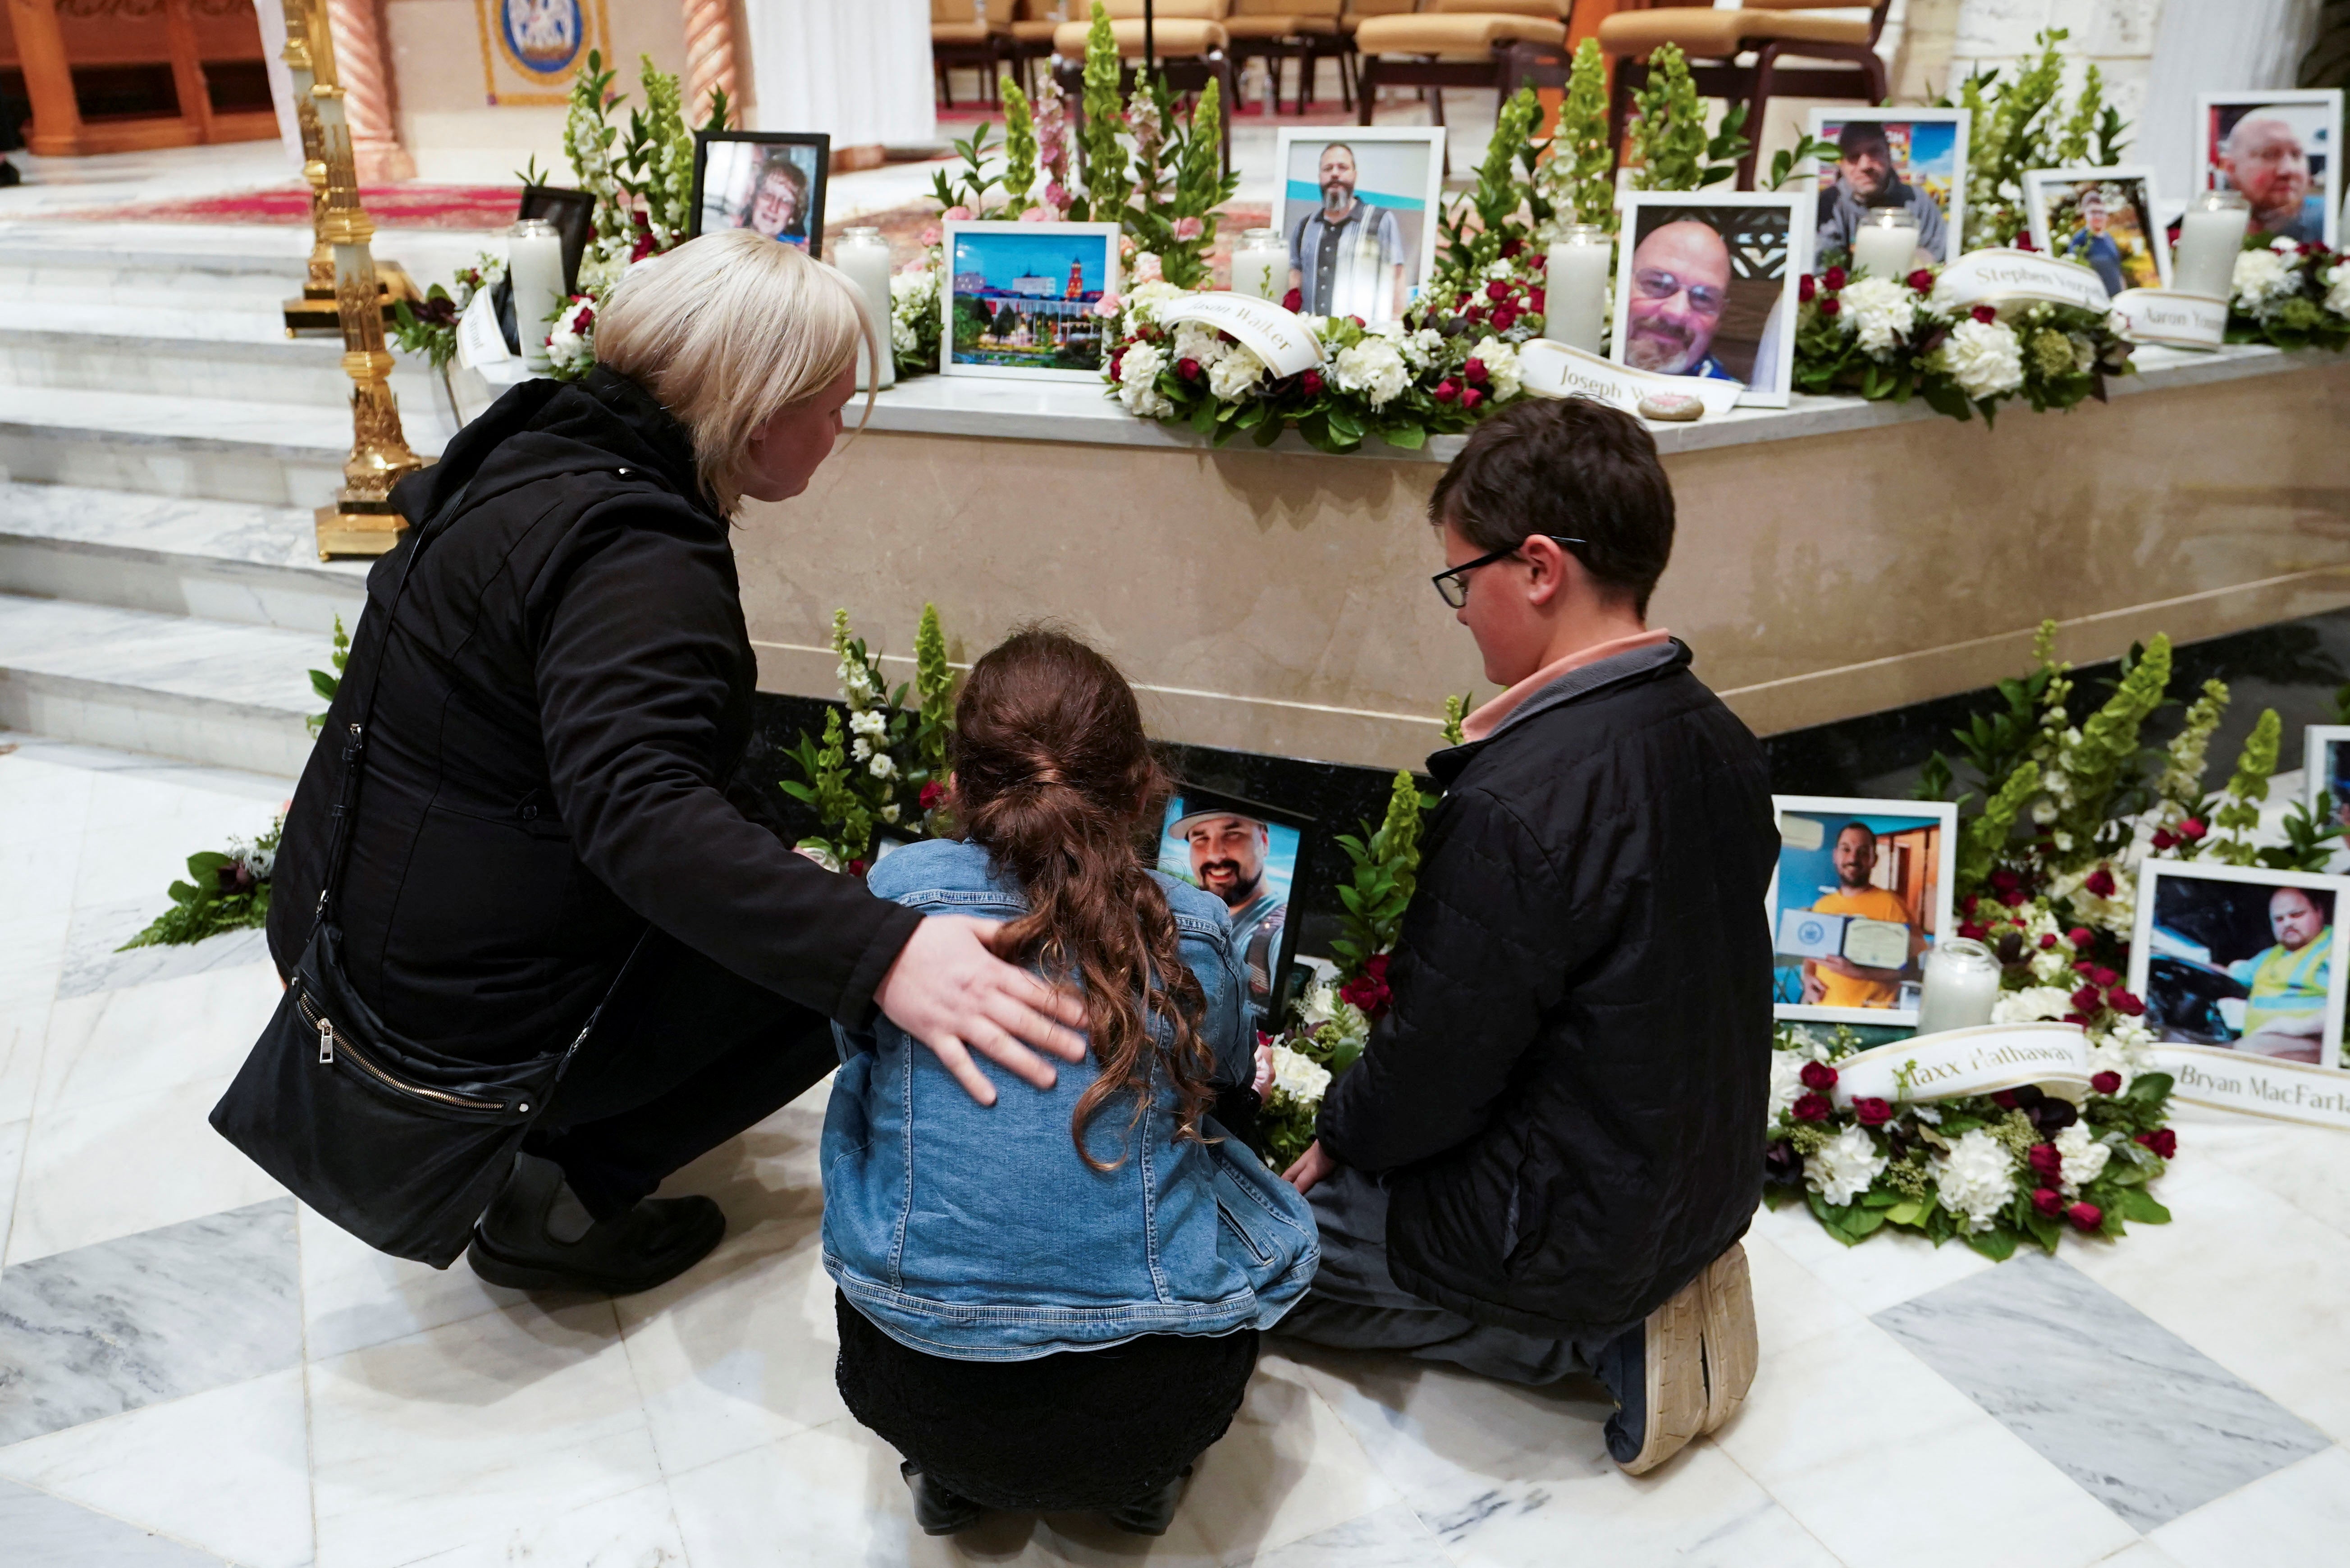 Mourners look at pictures of the victims during a vigil for the victims of the deadly mass shooting, at the Basilica of Saints Peter and Paul, in Lewiston, Maine